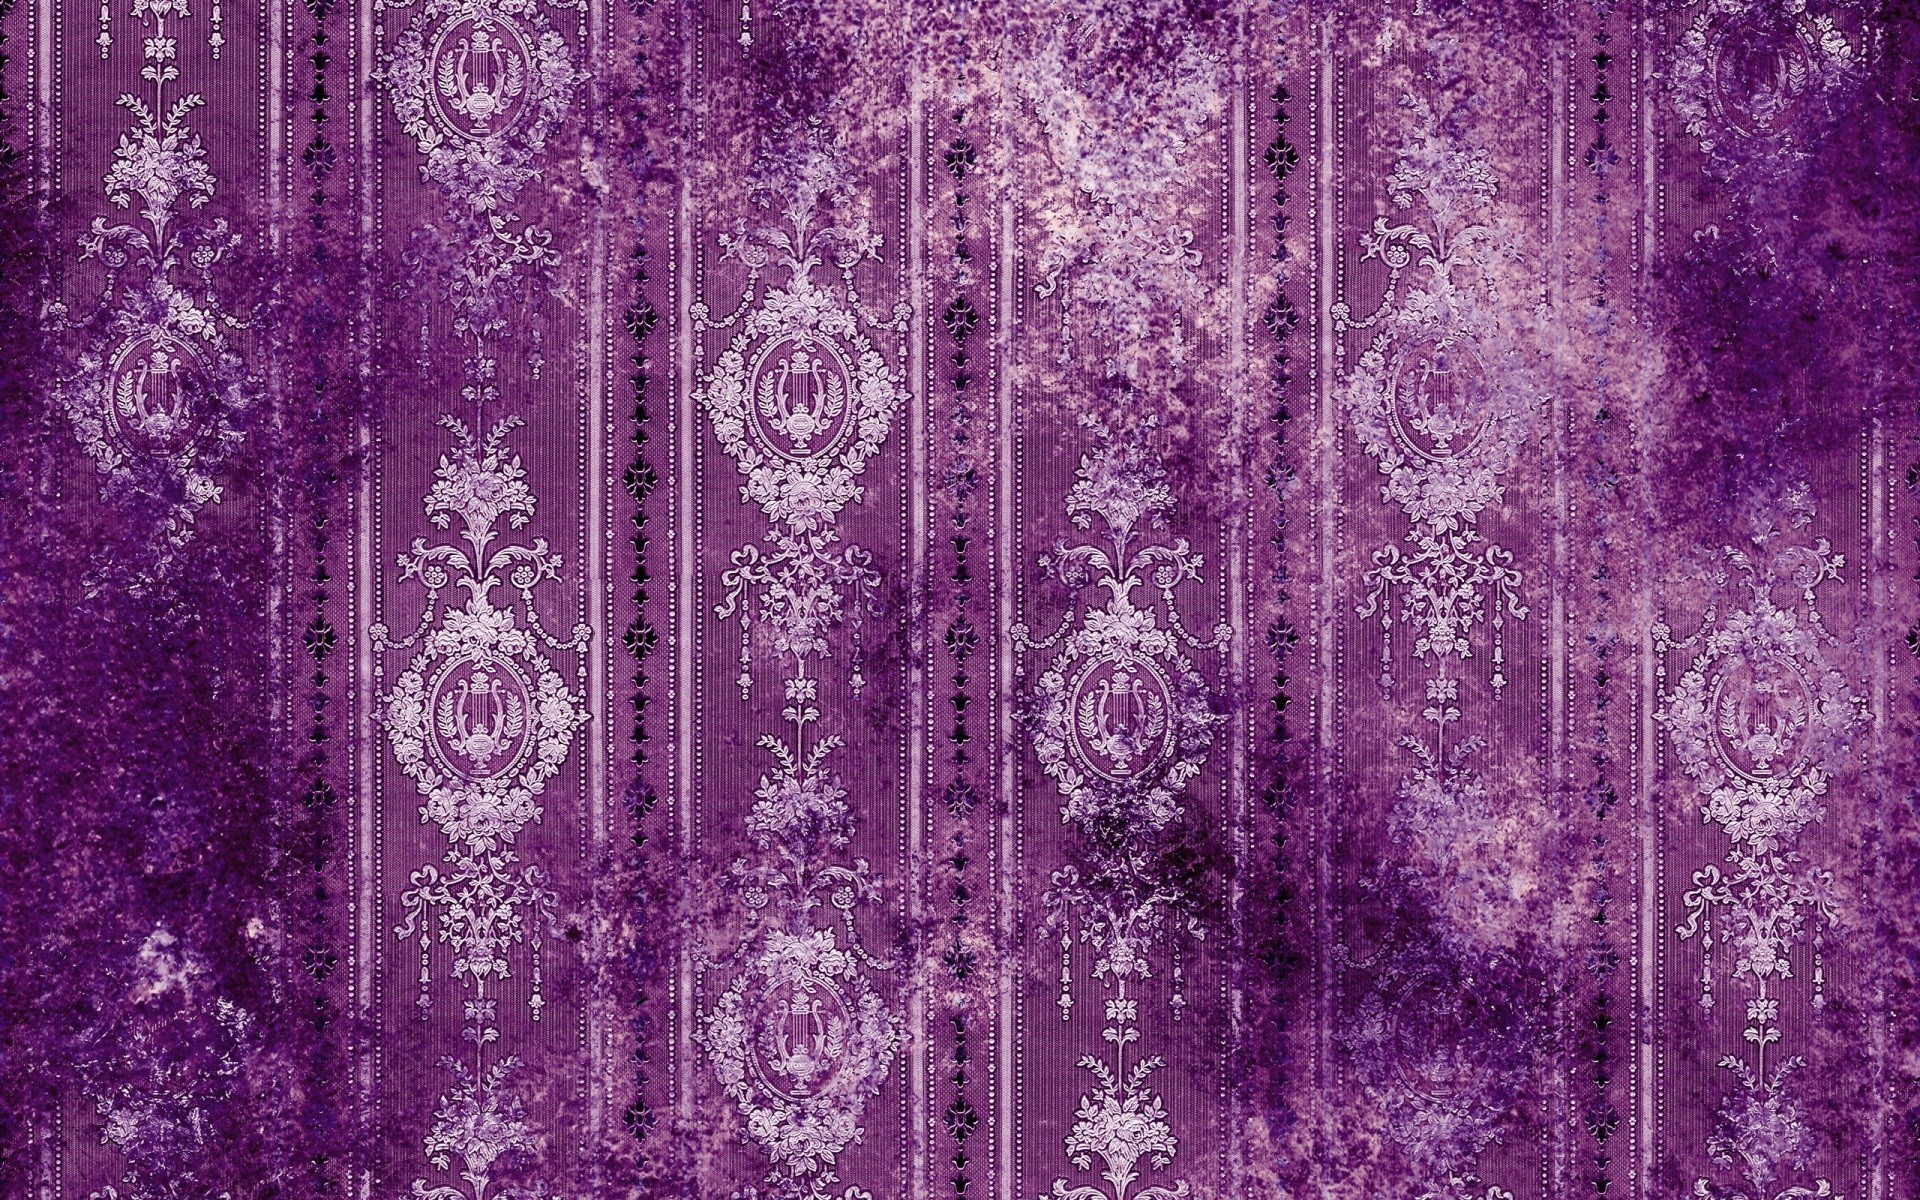 Vintage Wallpaper Abstract Old Purple Patterns